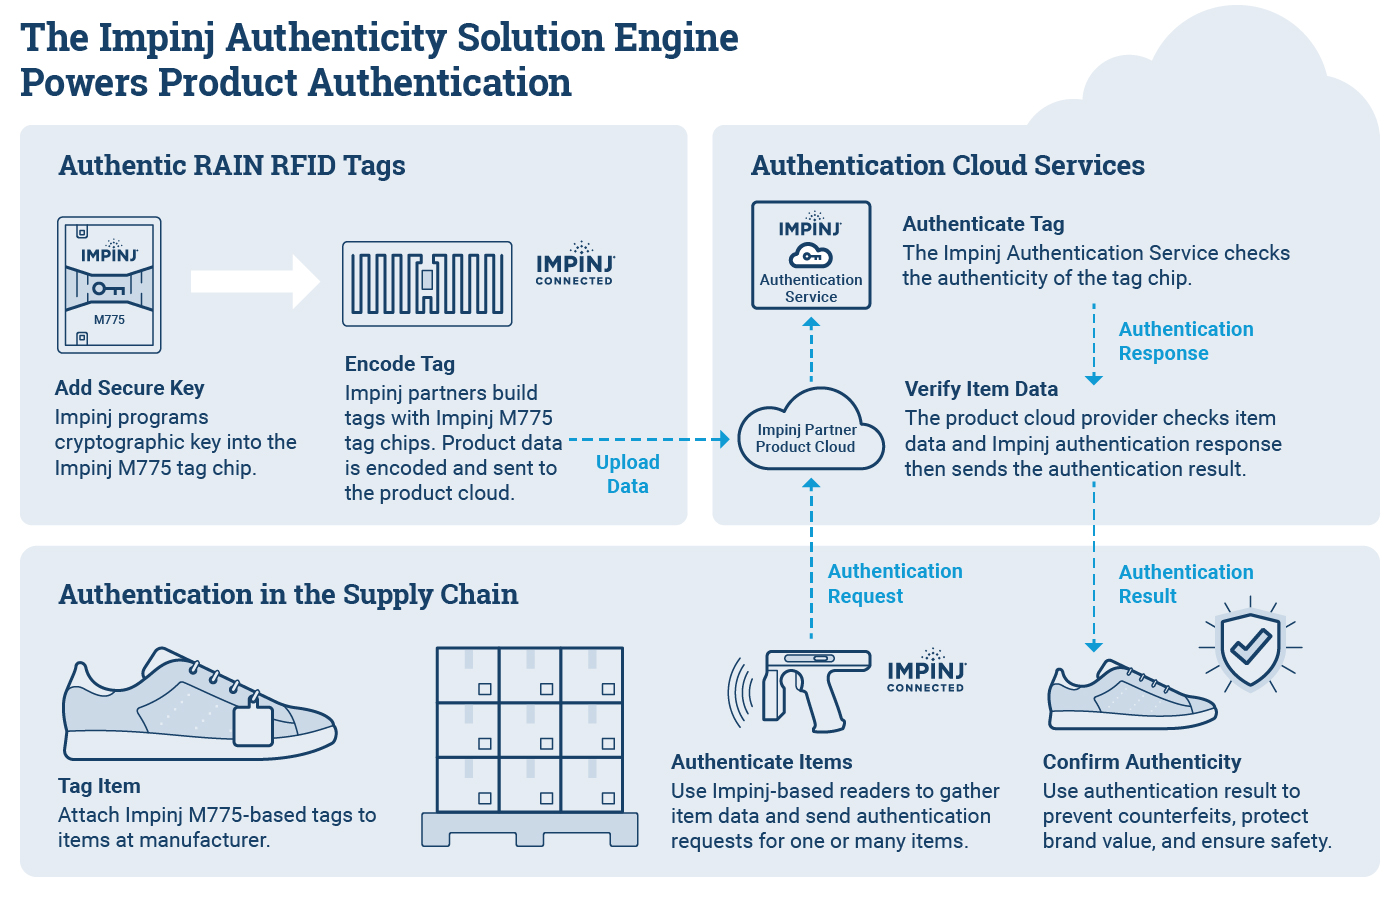 Infographic of Impinj Authenticity Solution Engine highlighting the process of RAIN RFID tag authentication for secure product verification in the supply chain.